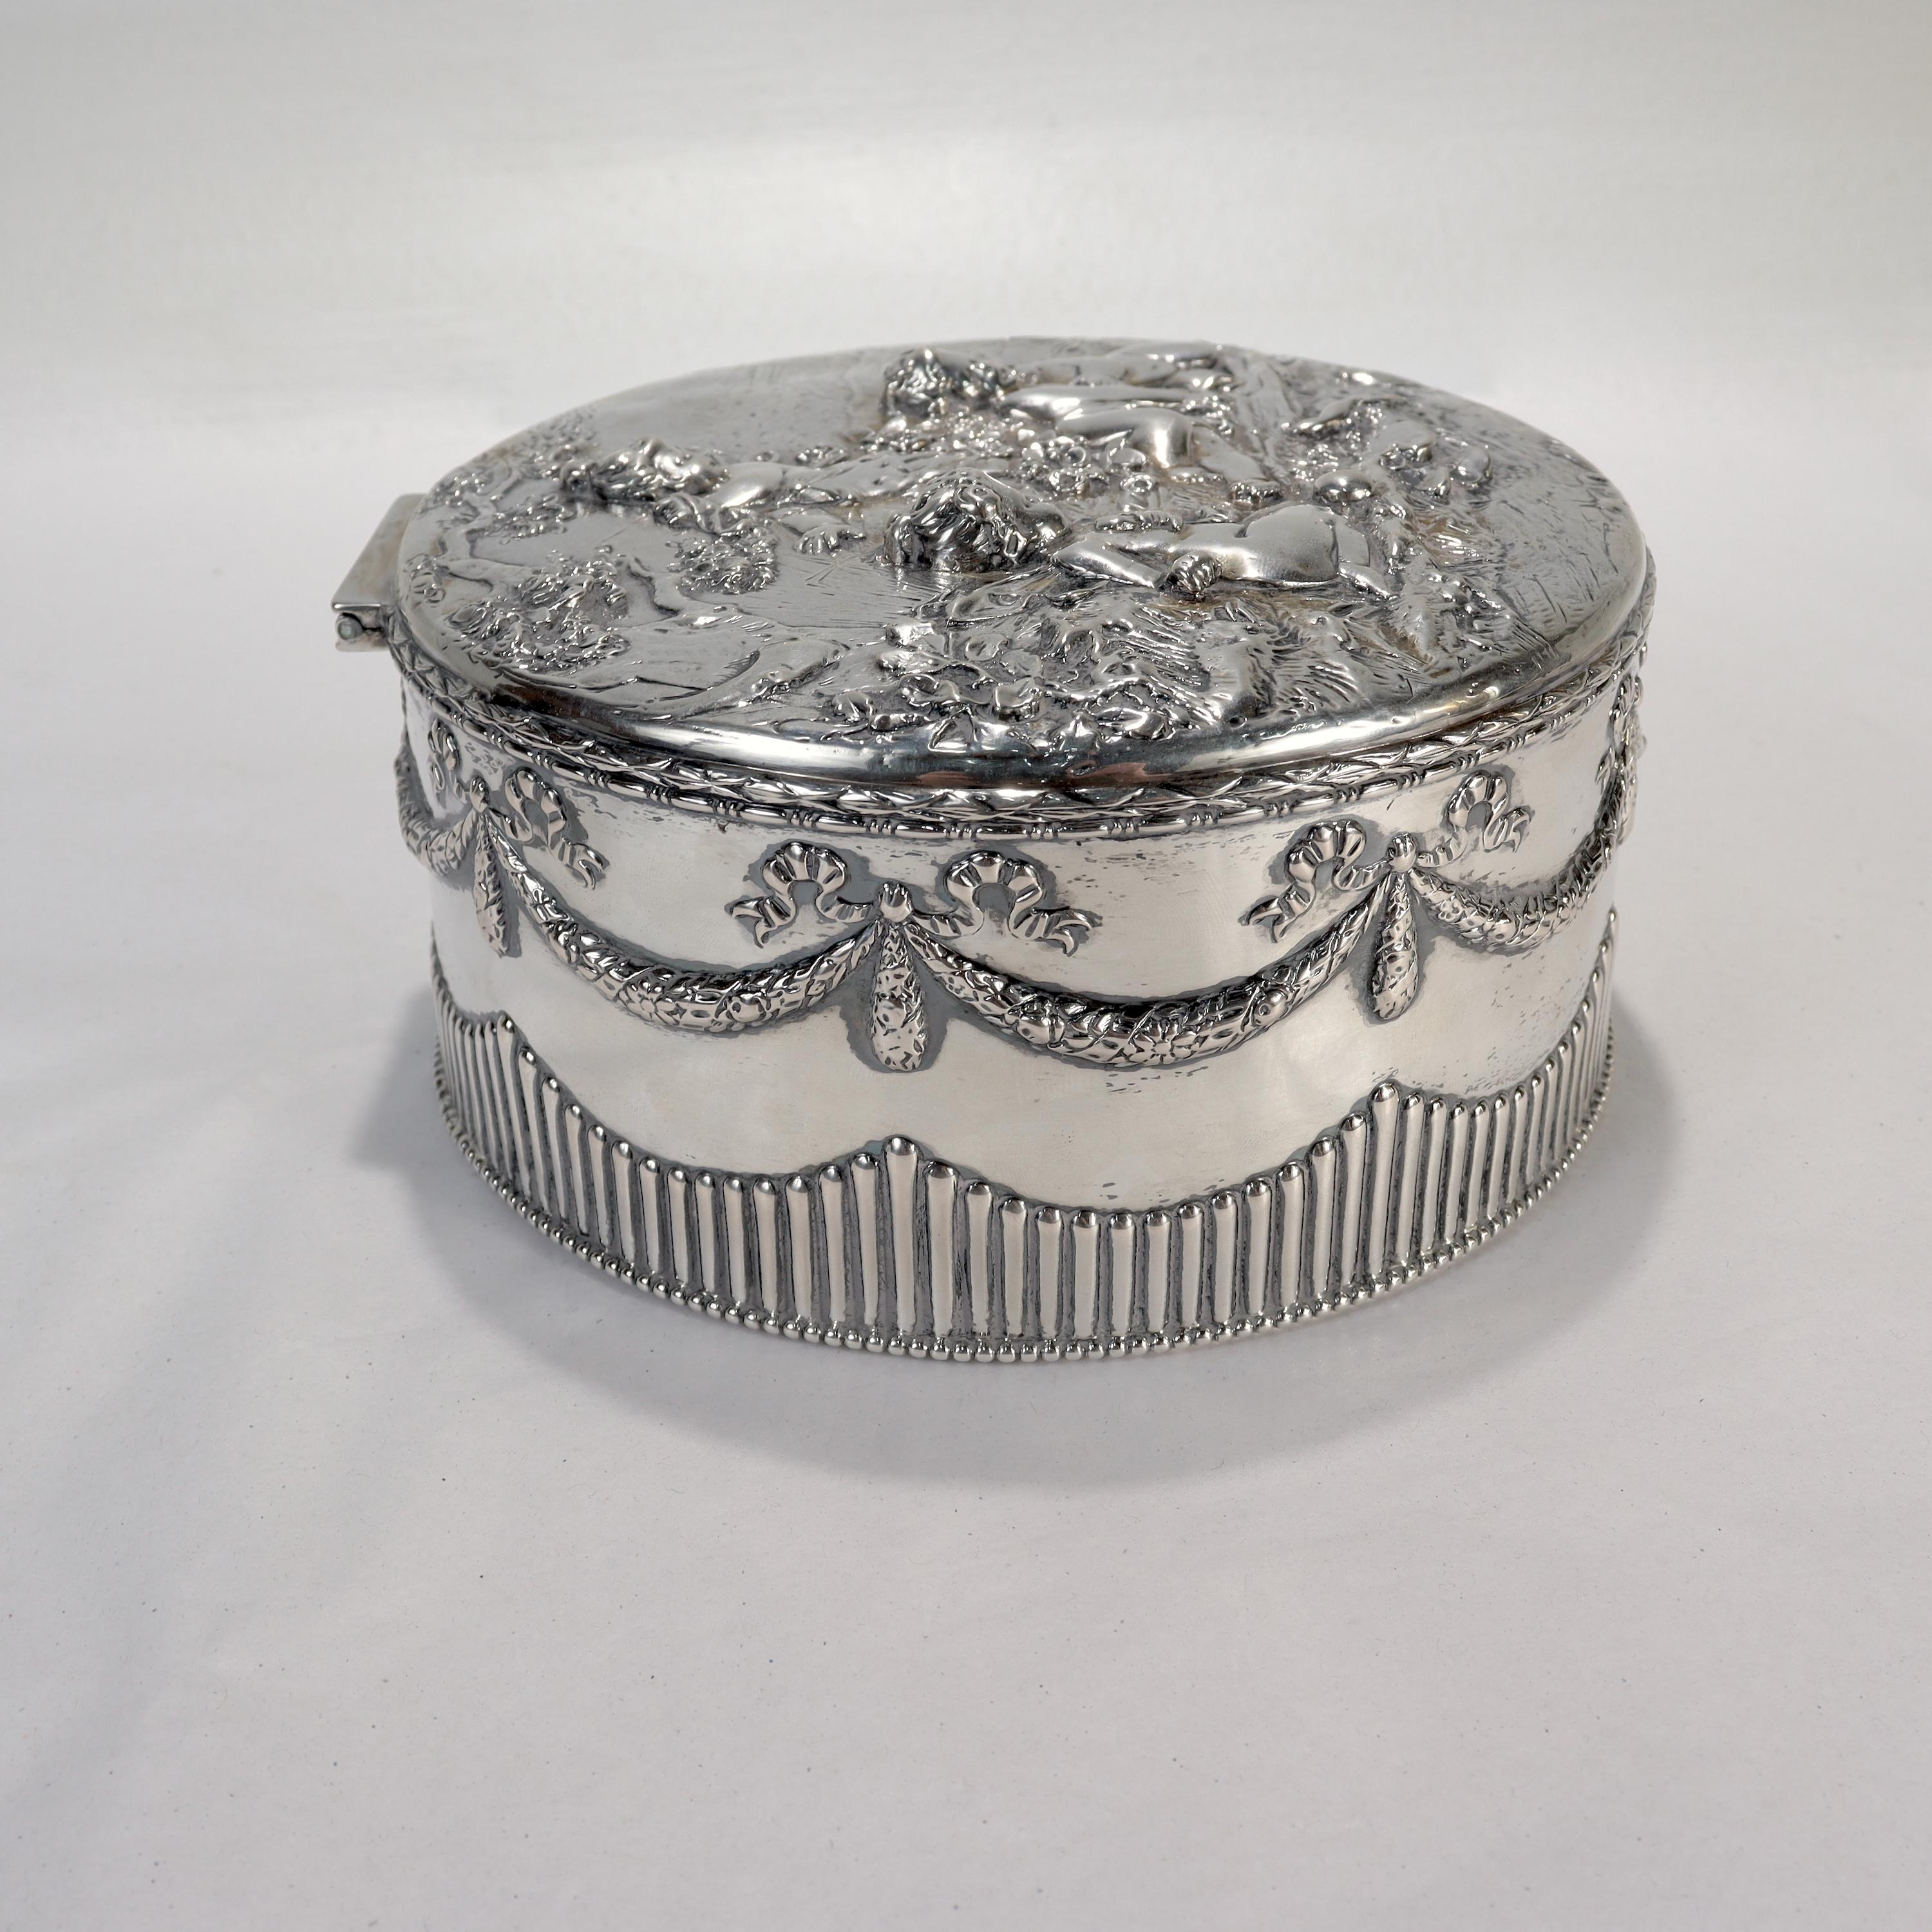 Antique Signed German Figural Neoclassical Silver Table Dresser Box or Casket For Sale 3